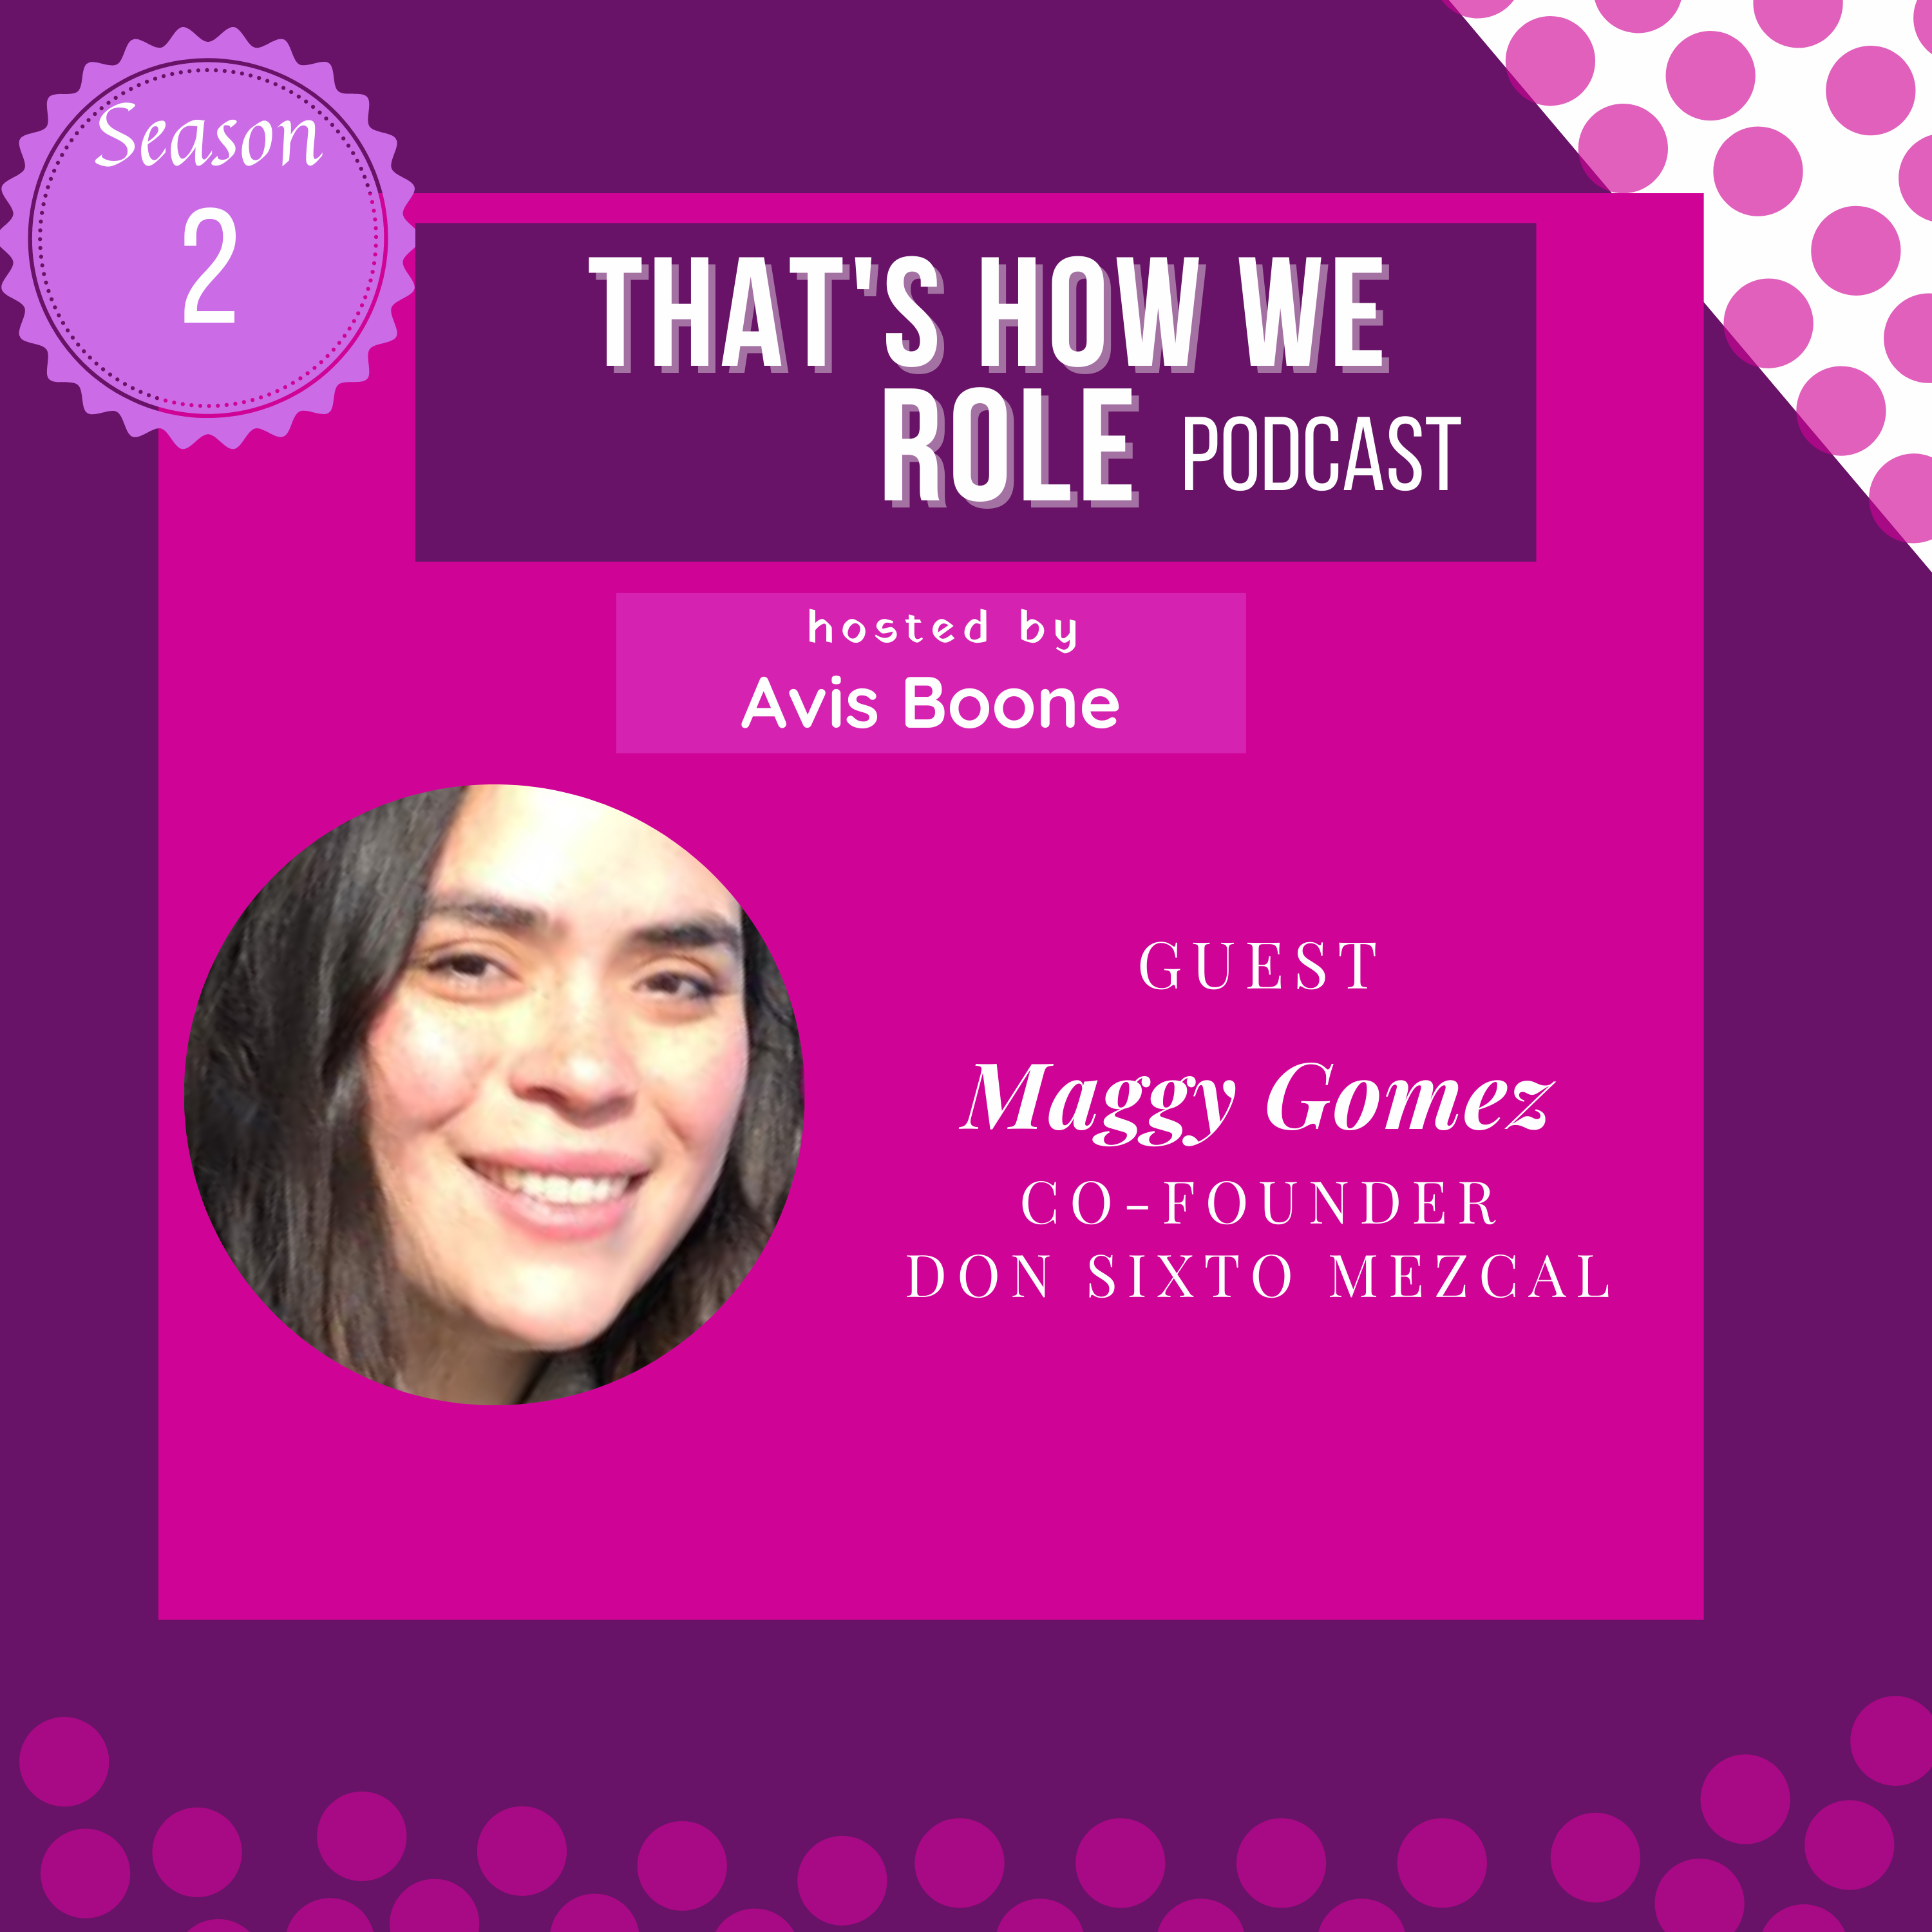 Maggy Gomez guest on That's How We Role Podcast